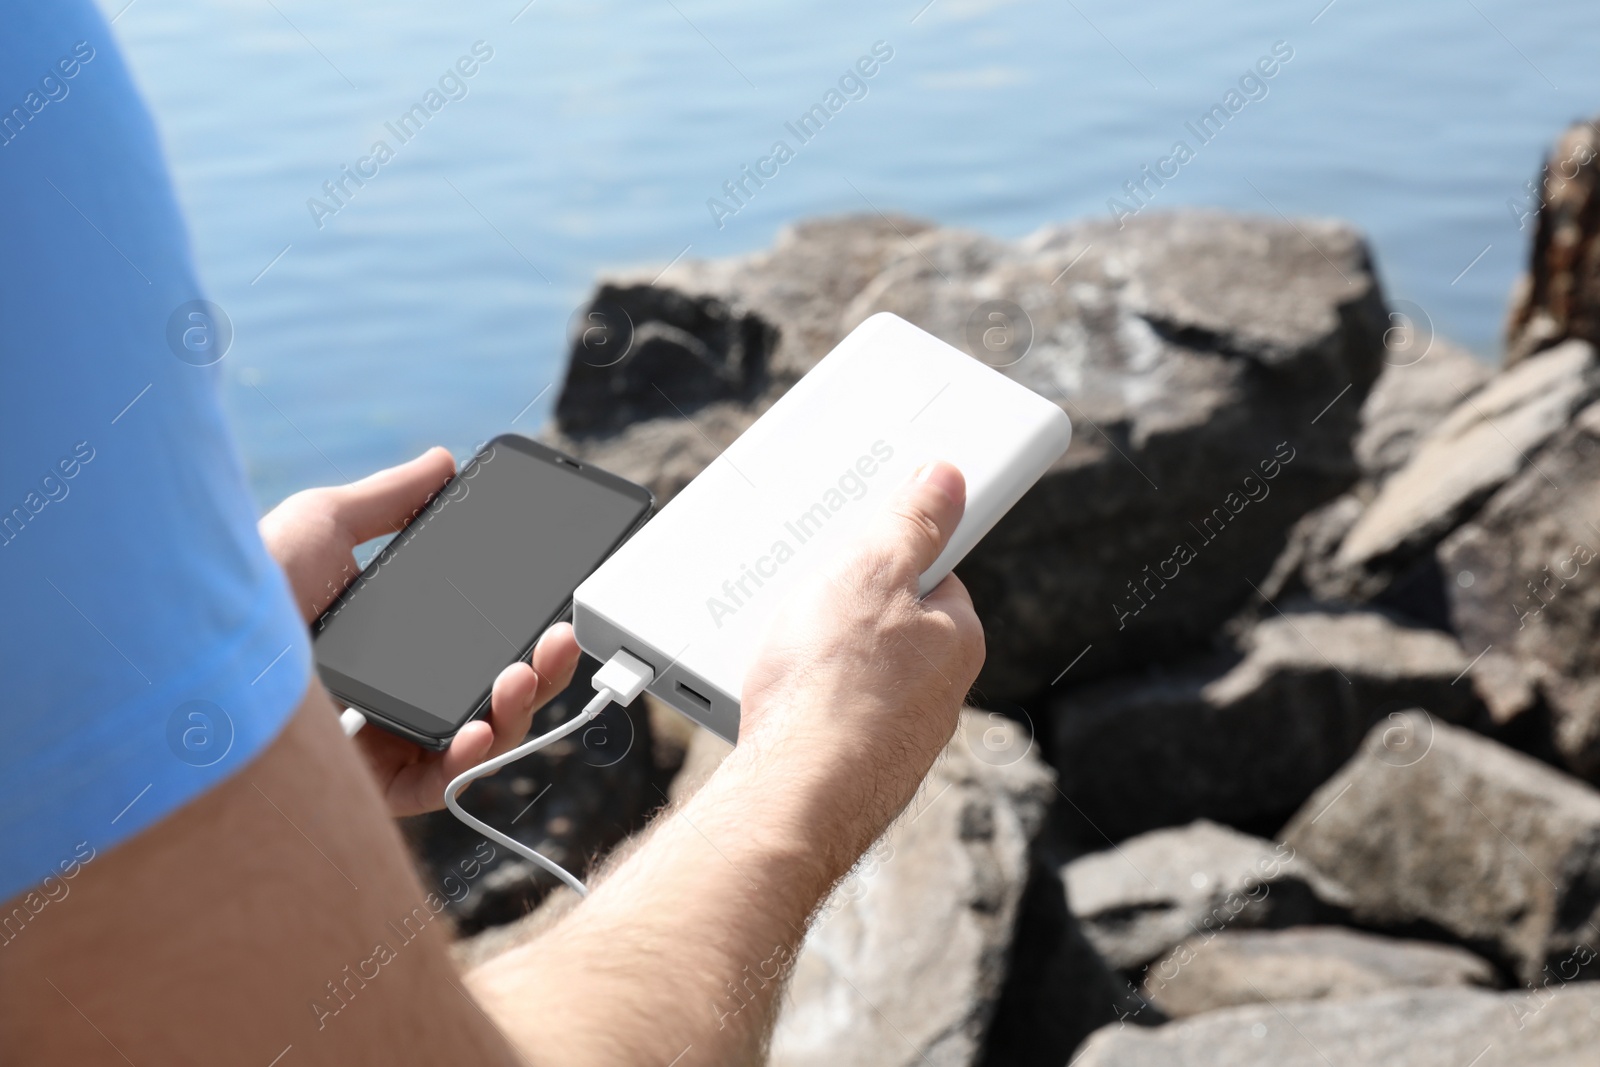 Photo of Man charging mobile phone with power bank on rocky mountain near river, closeup